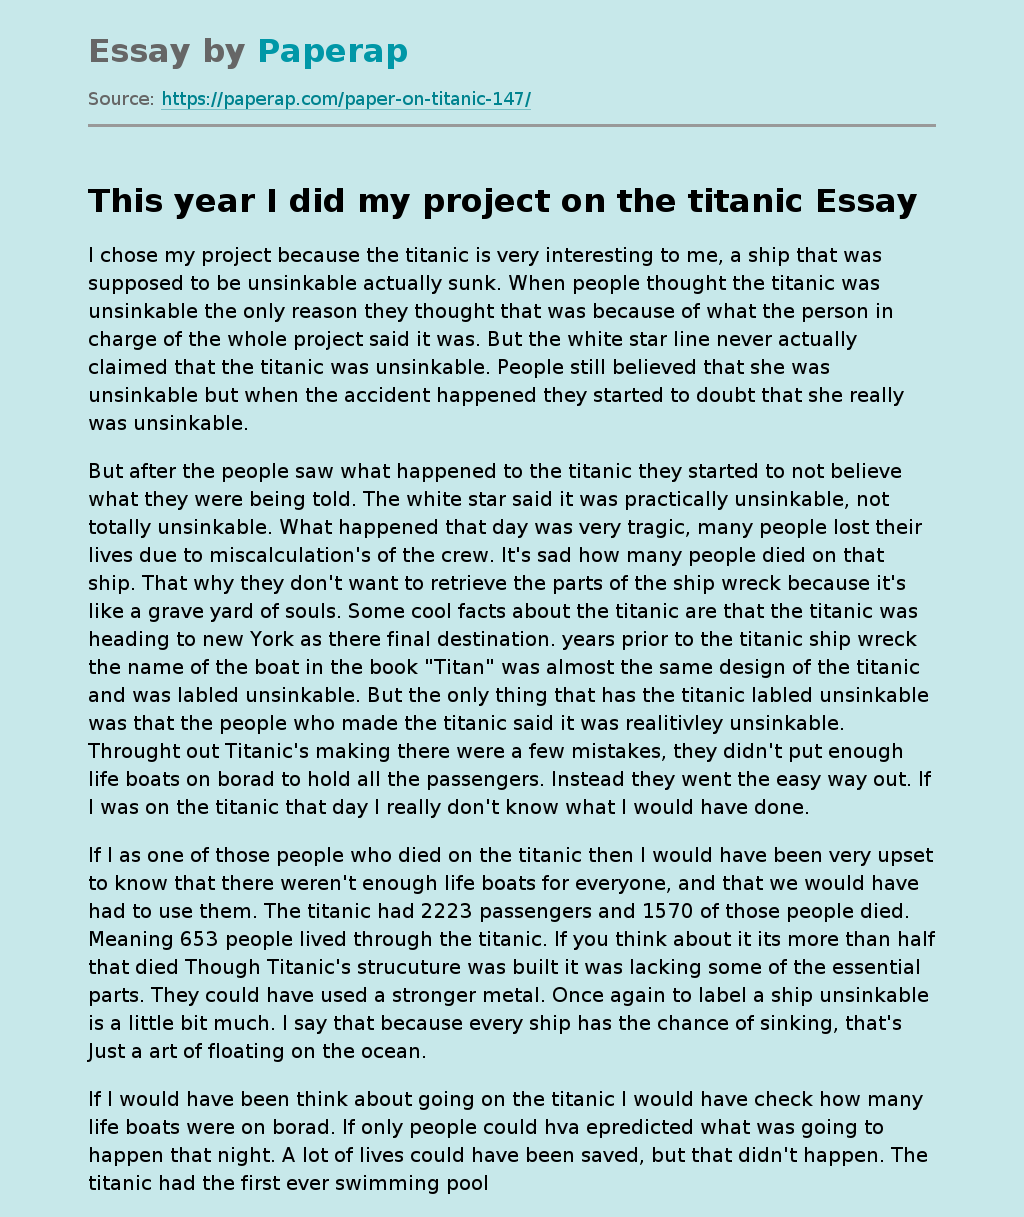 This year I did my project on the titanic